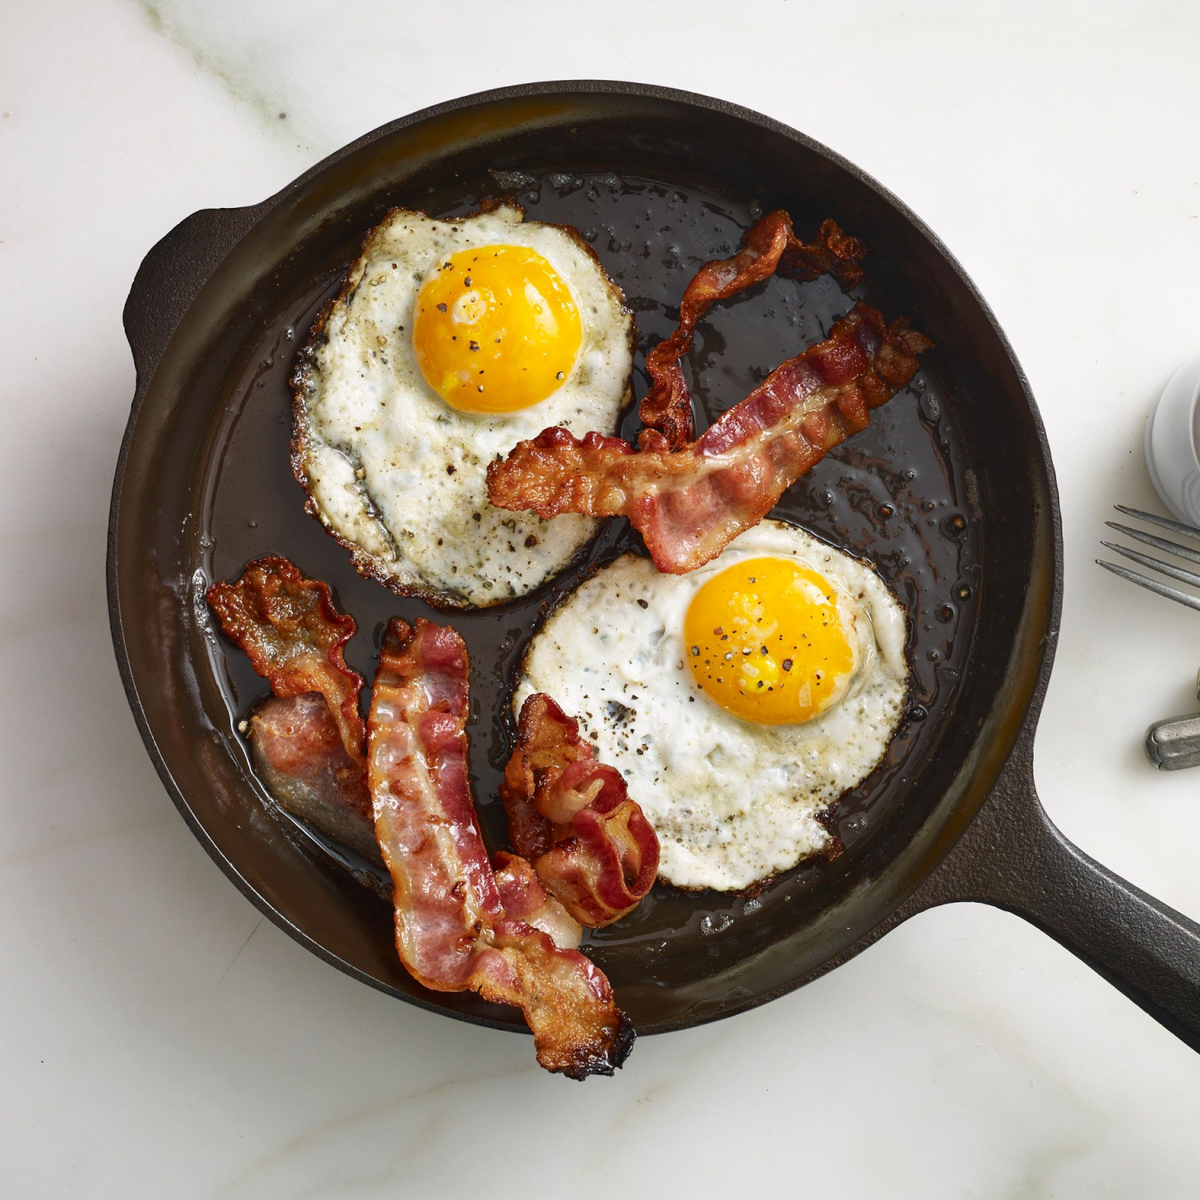 How to Make Non-Stick Eggs in a Cast Iron Skillet • The Prairie Homestead